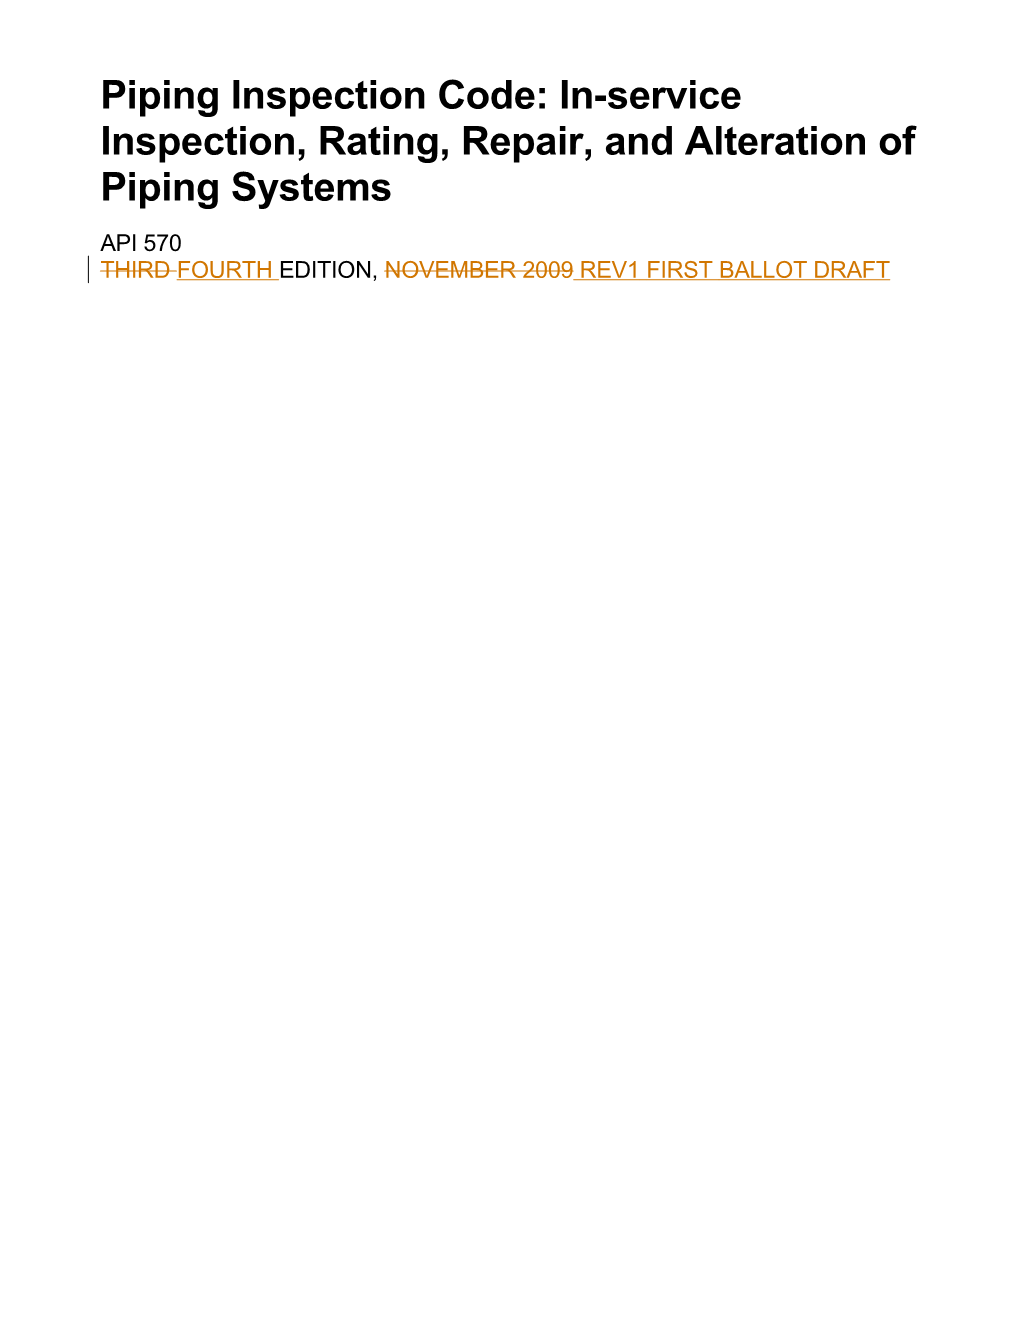 Piping Inspection Code: In-Service Inspection, Rating, Repair, and Alteration of Piping